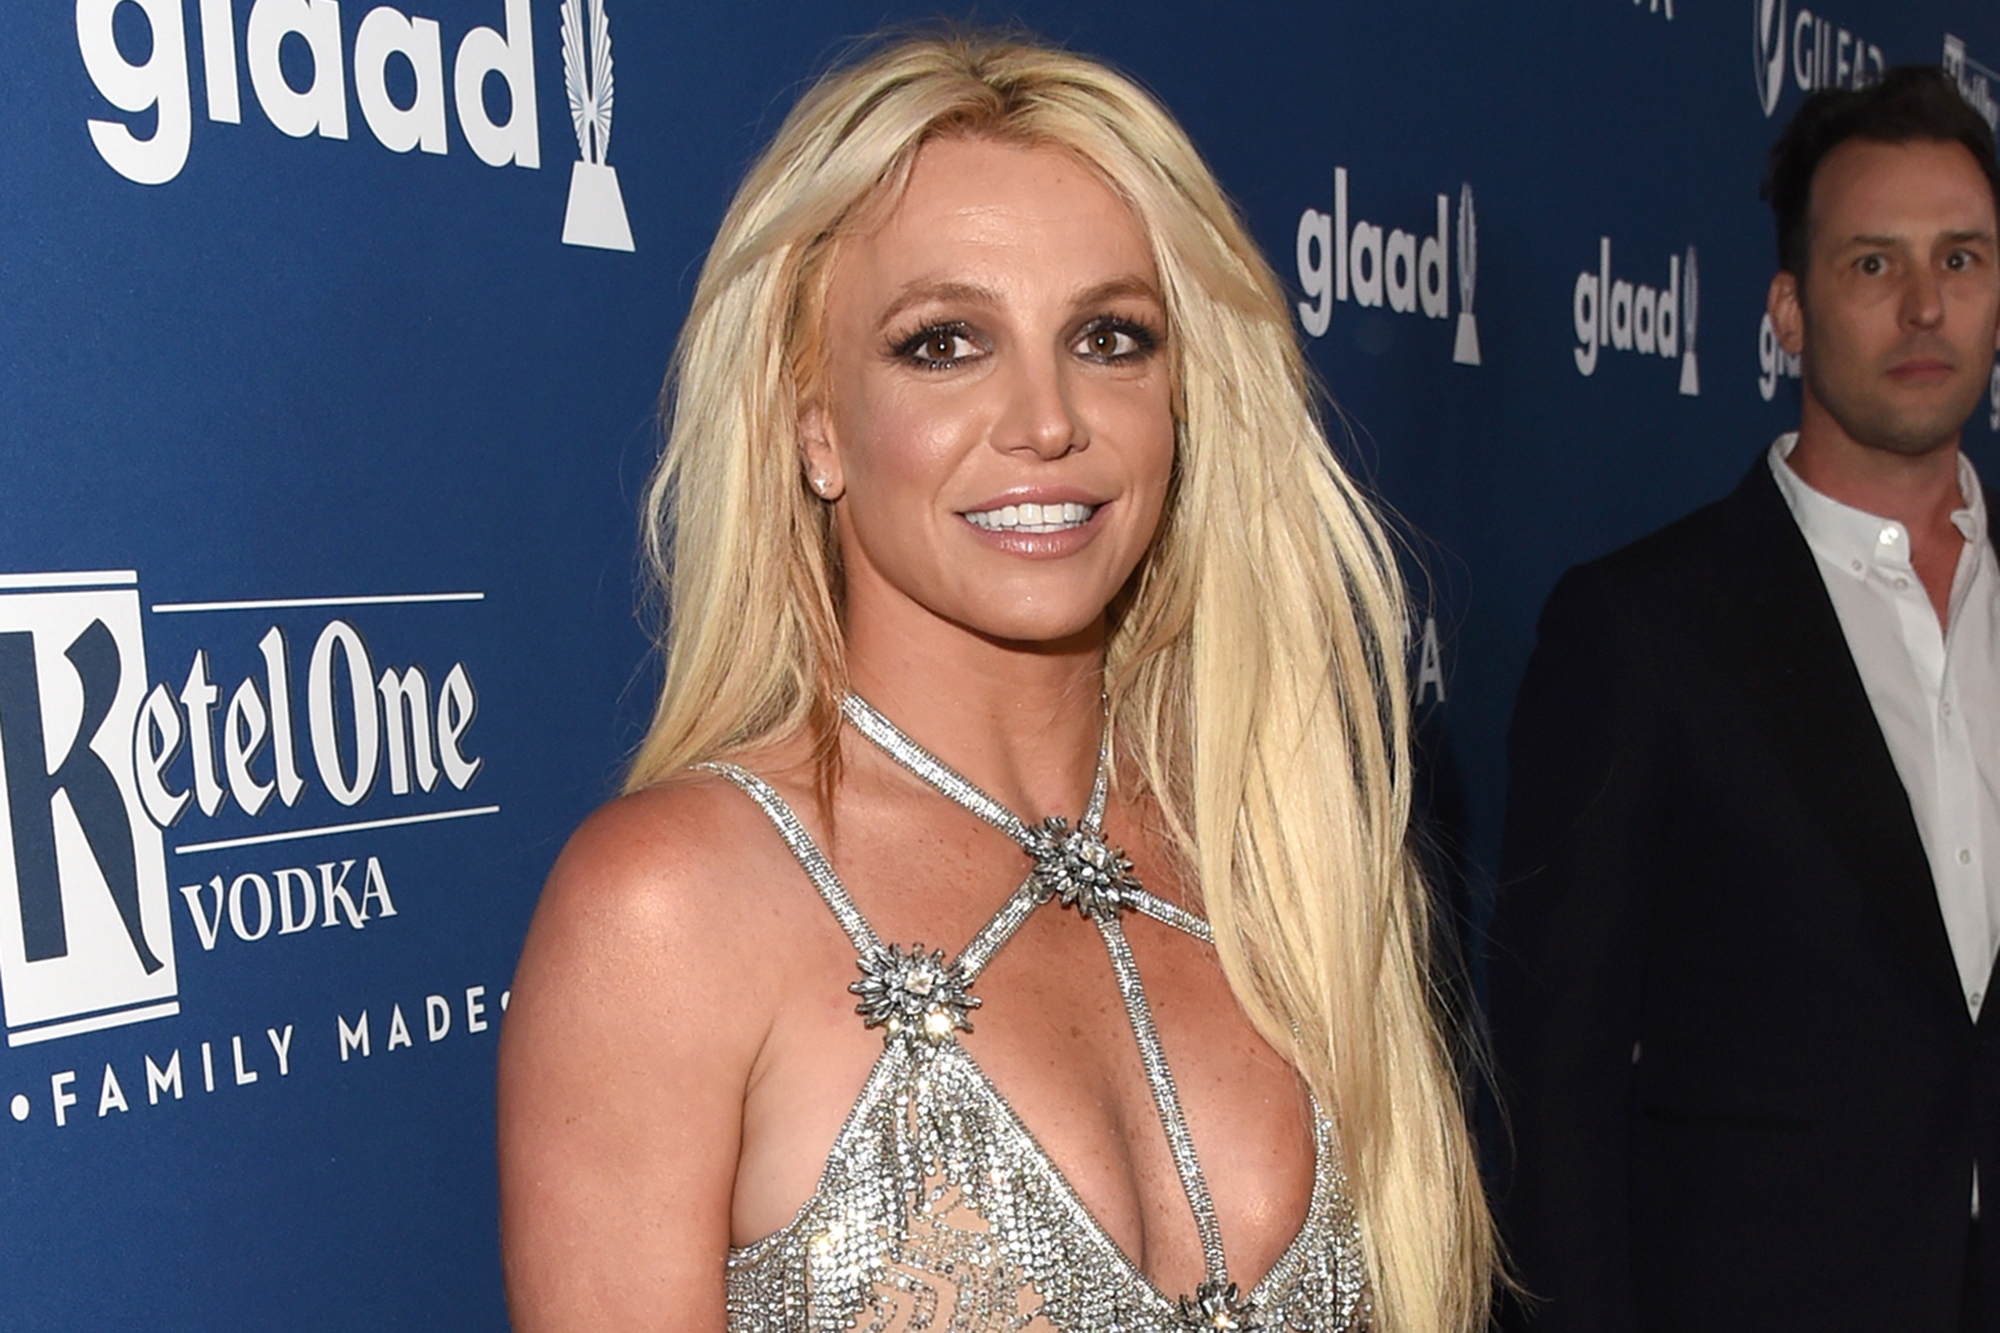 Britney Spears set to pen tell-all book in bombshell $15M deal - Page Six